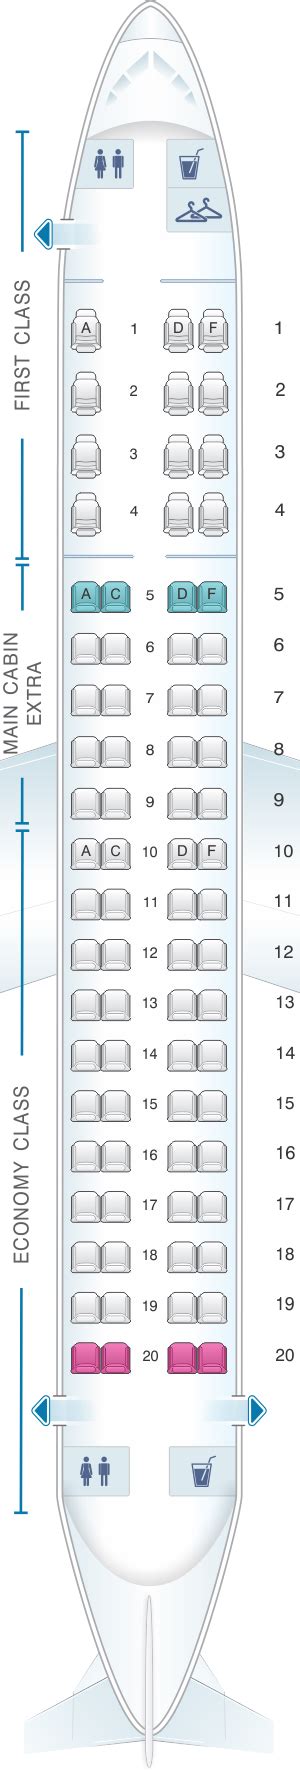 American Airlines Embraer 175 Seat Map; Seat 3d; American Airlines Reviews. Seating Charts · Airbus A319 · Airbus A319 (MCE) · Airbus A320 · Airbus A321 · Airbus A321 (transcon) · Airbus A321 (US Airways) · Airbus A330-200 · Airbus A330-300 · Boeing 737 MAX 8 · Boeing 737-800 · Boeing 737-800 (New MCE) · Boeing 757-200 · Boeing 757 .... 